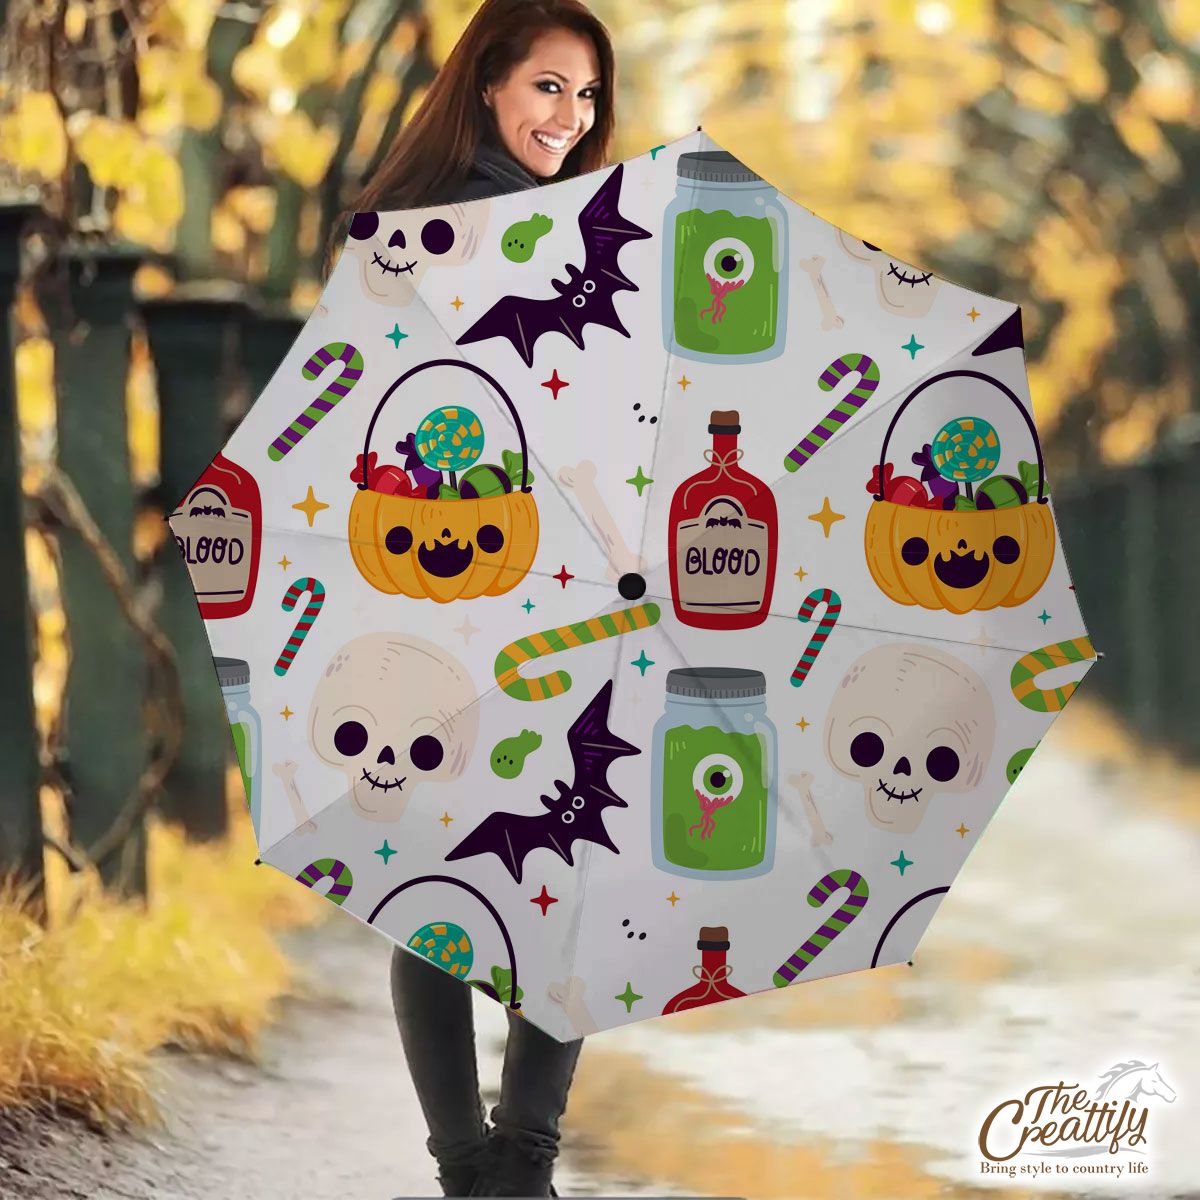 Cute Pumpkin, Jack O Lantern Full of Candy, Witch Potions and Bat White Halloween Umbrella